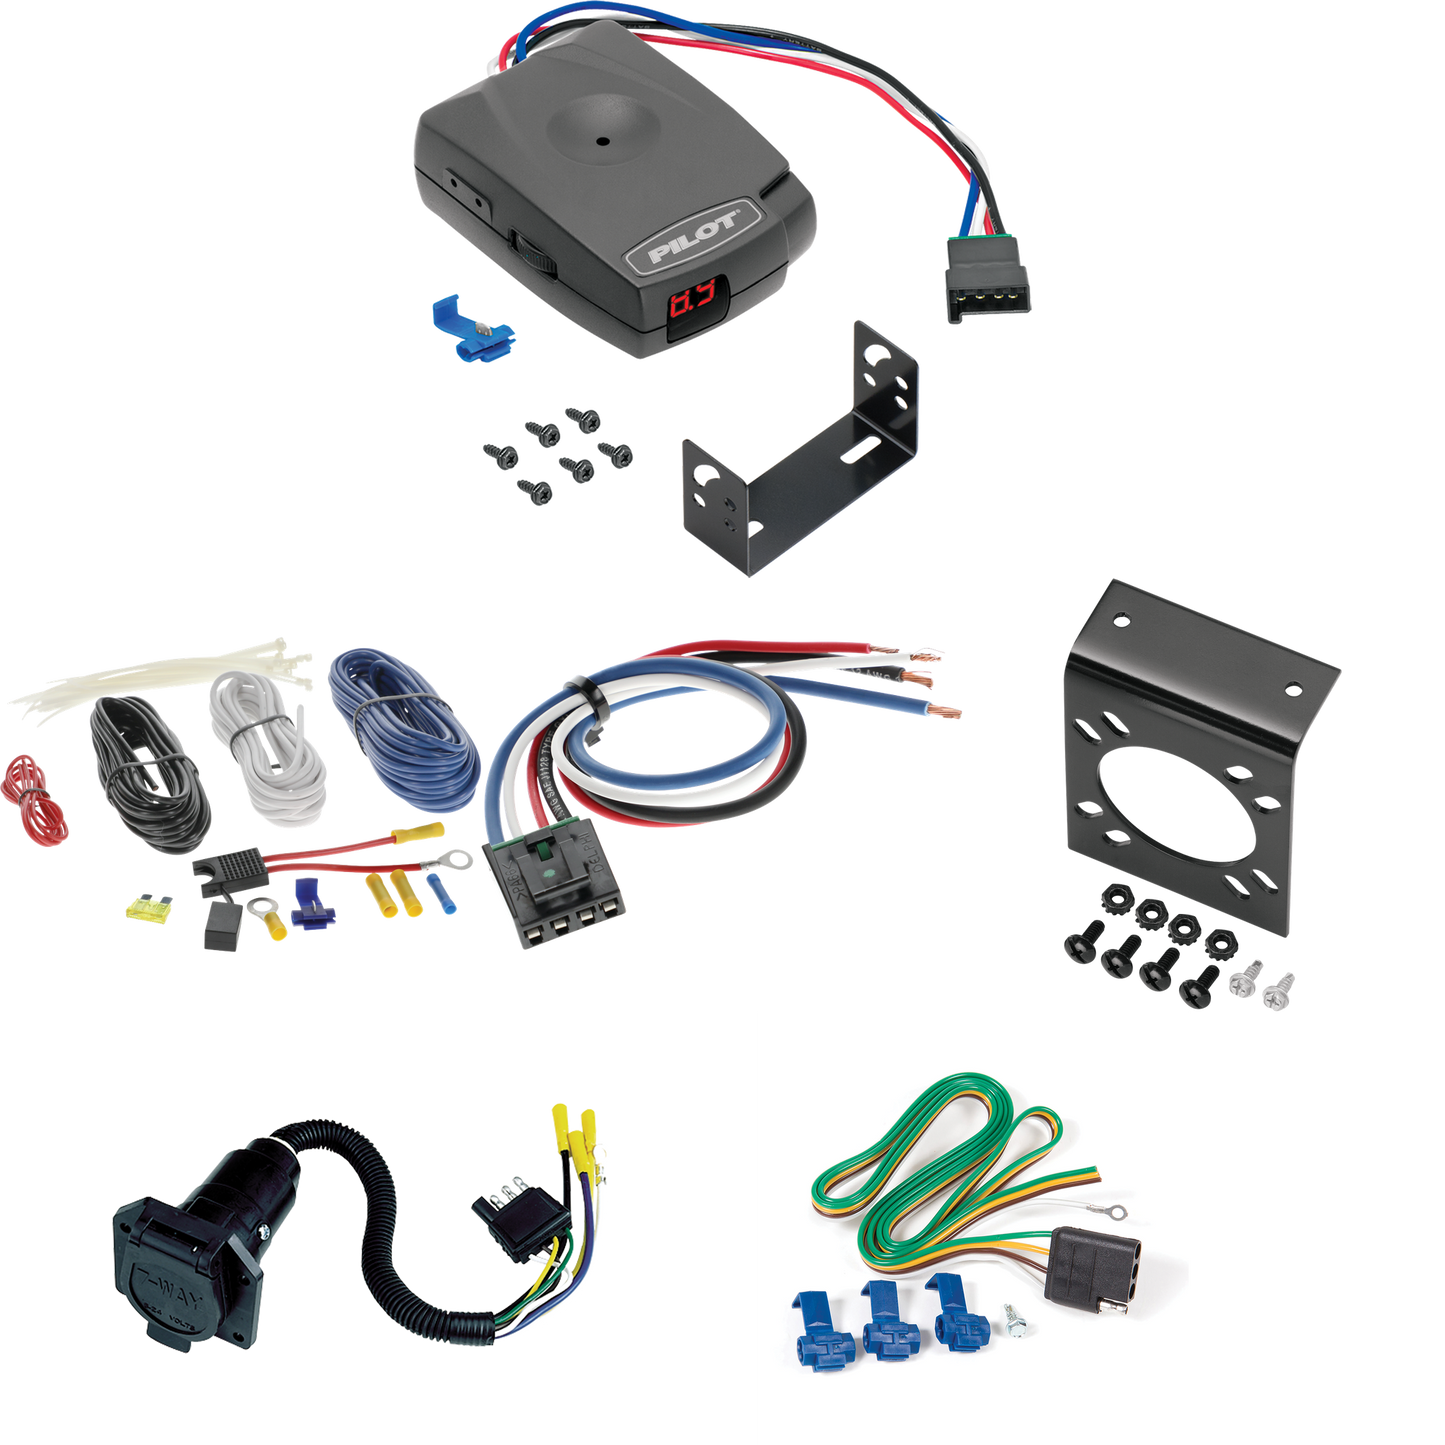 Fits 1989-1997 Ford F Super Duty 7-Way RV Wiring + Pro Series Pilot Brake Control + Generic BC Wiring Adapter By Reese Towpower